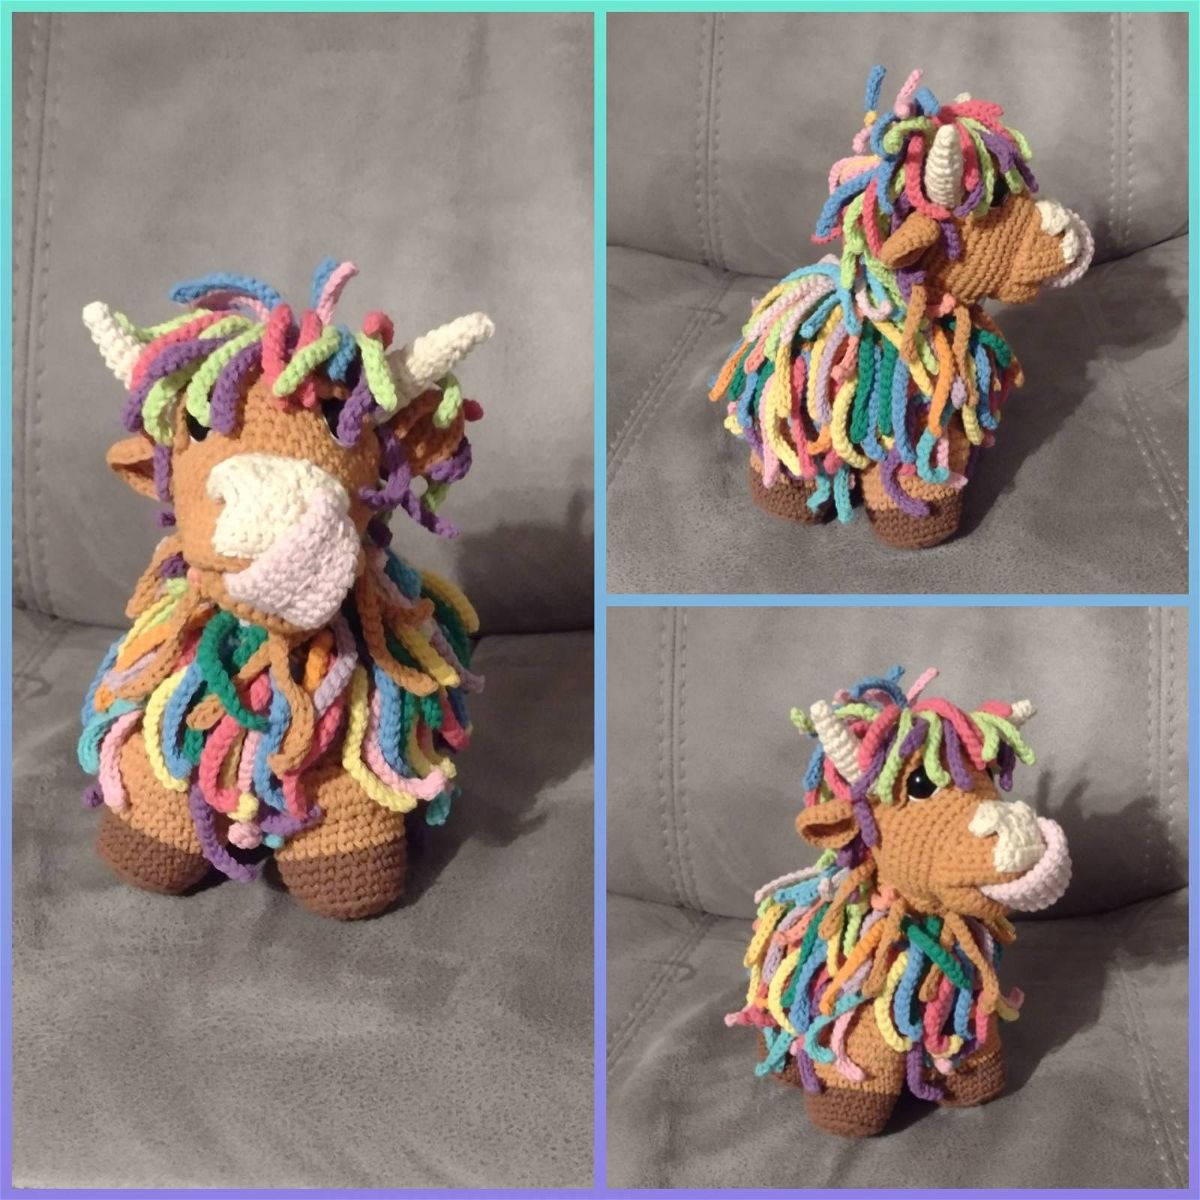 Crochet Amigurumi Highland Cow Pattern Review by Rachael Faulkner for Cottontail Whiskers